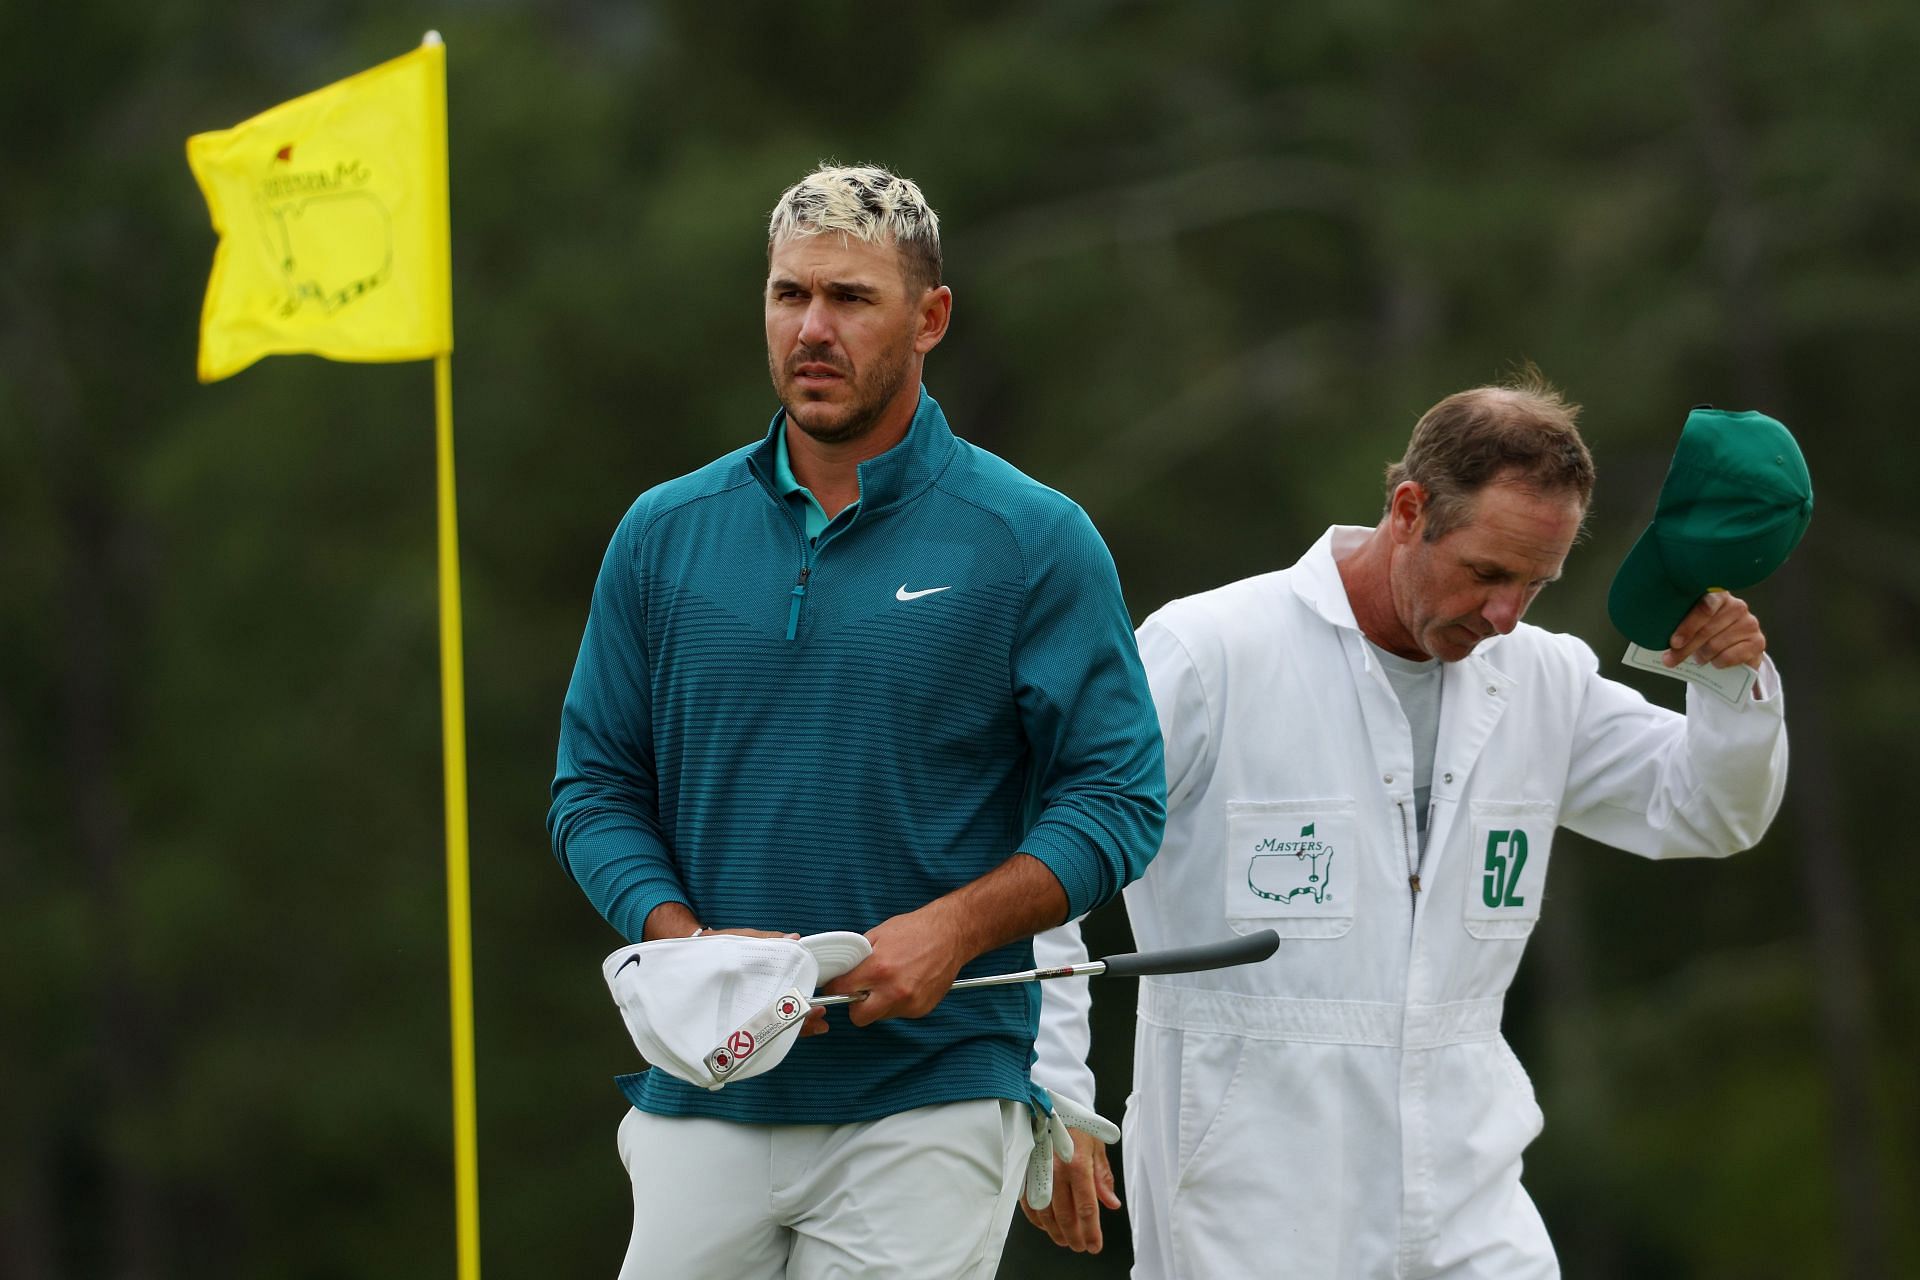 Brooks Koepka is returning to the Masters